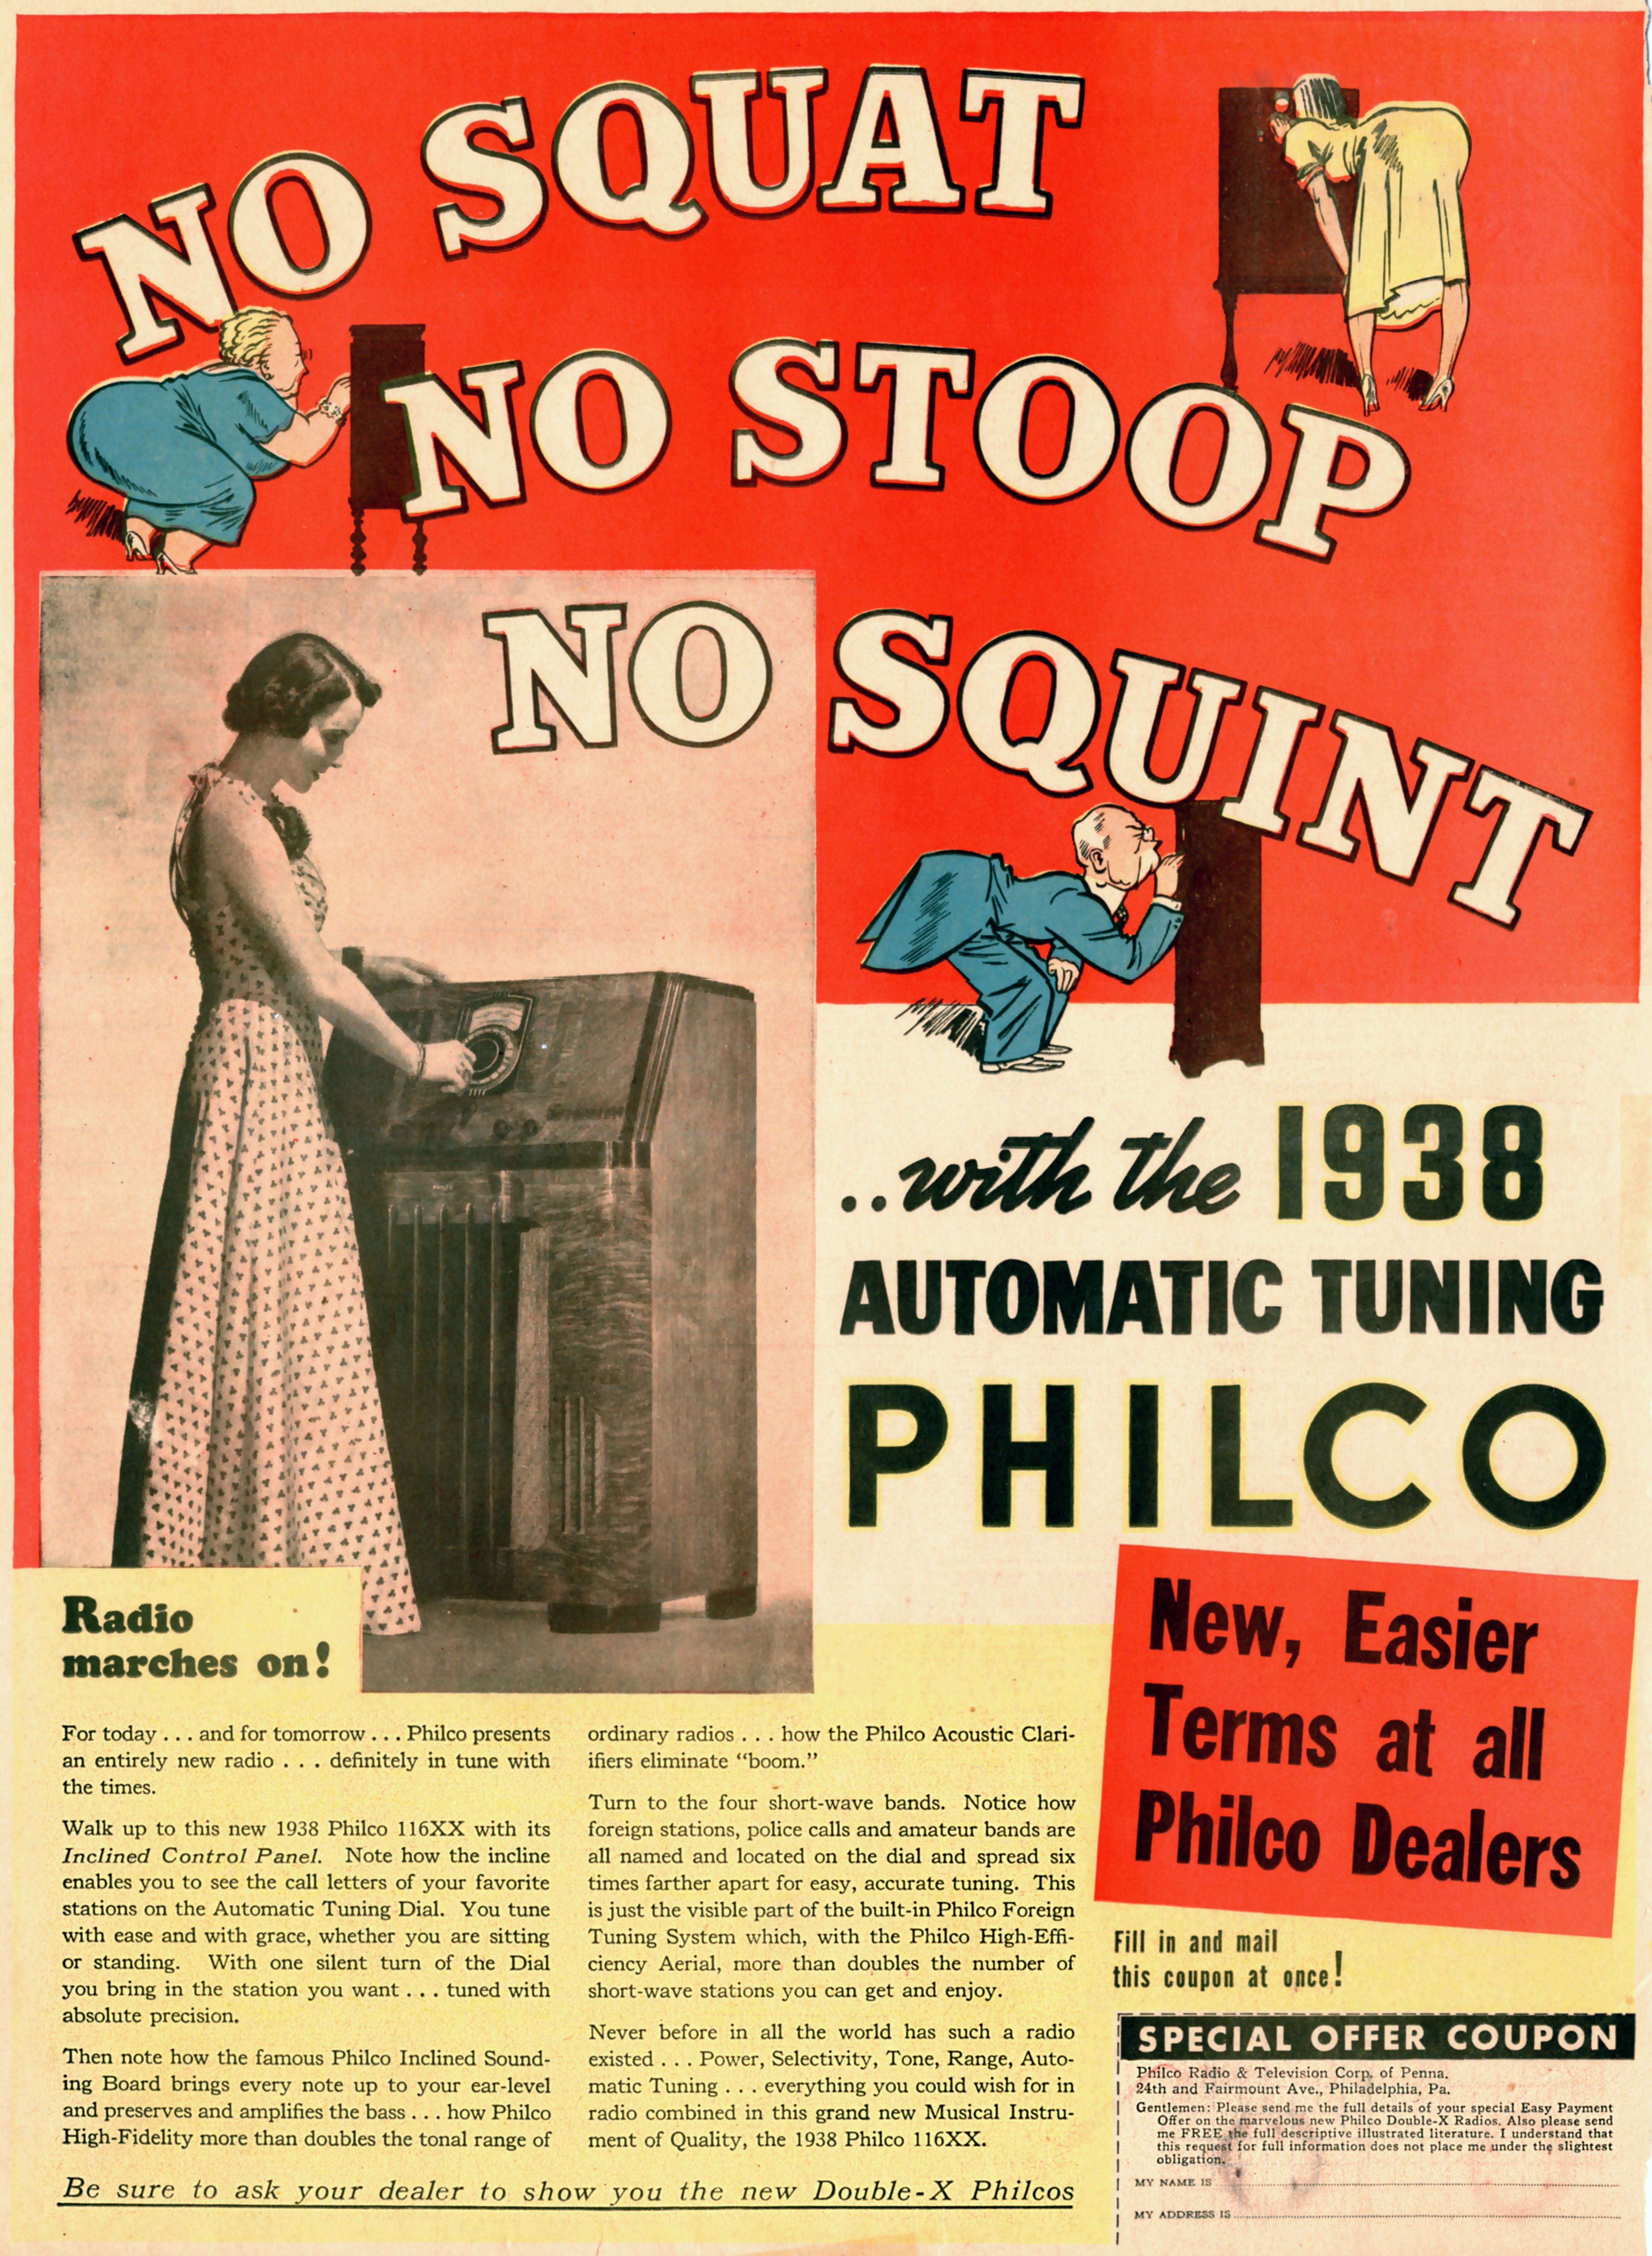 Ad for a radio featuring automatic tuning, with "No squat, no stoop, no squint" promise.